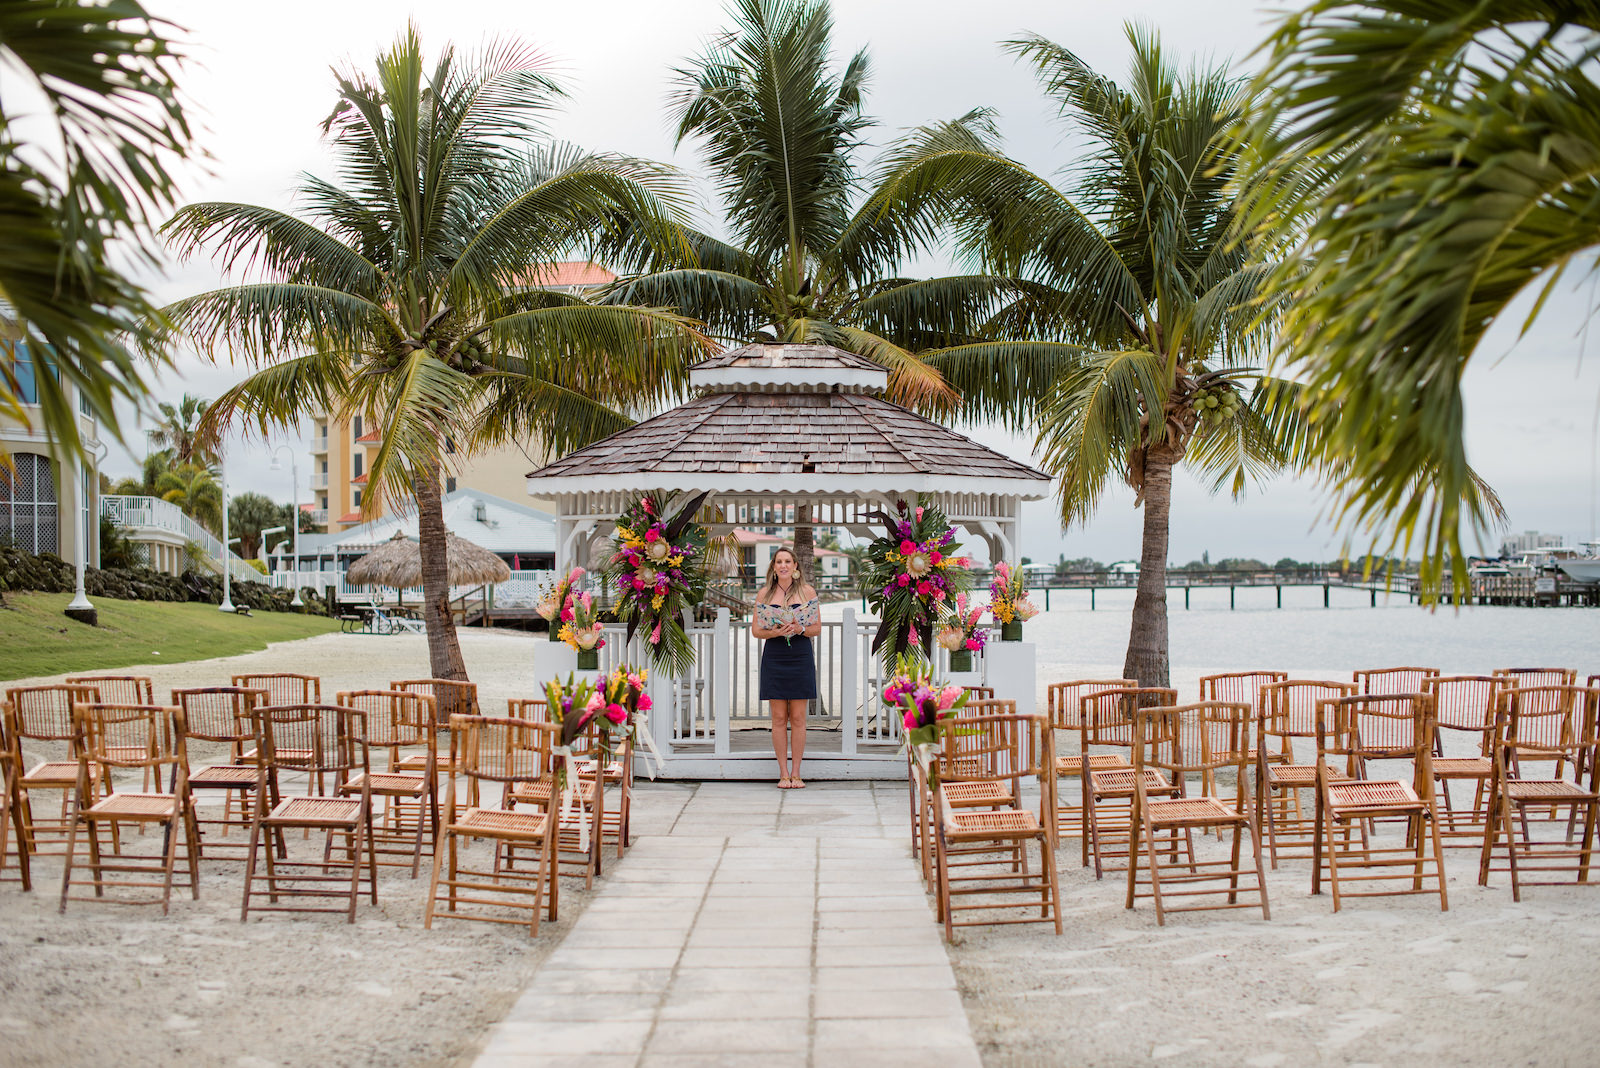 Tropical Florida Wedding Ceremony and Decor, Bamboo Folding Chairs, Lilly Pulitzer Themed Floral Arrangements, Gazebo Alter with Bright Pink Exotic Flowers, Purple Stems, Blush King Proteas, with Green Palms and Monstera Leafs | Tampa Bay Vow Renewal and Micro wedding Planner Perfecting The Plan | St. Petersburg Private Beachfront Venue Isla Del Sol | St. Pete Beach DJ Grant Hemond & Associates